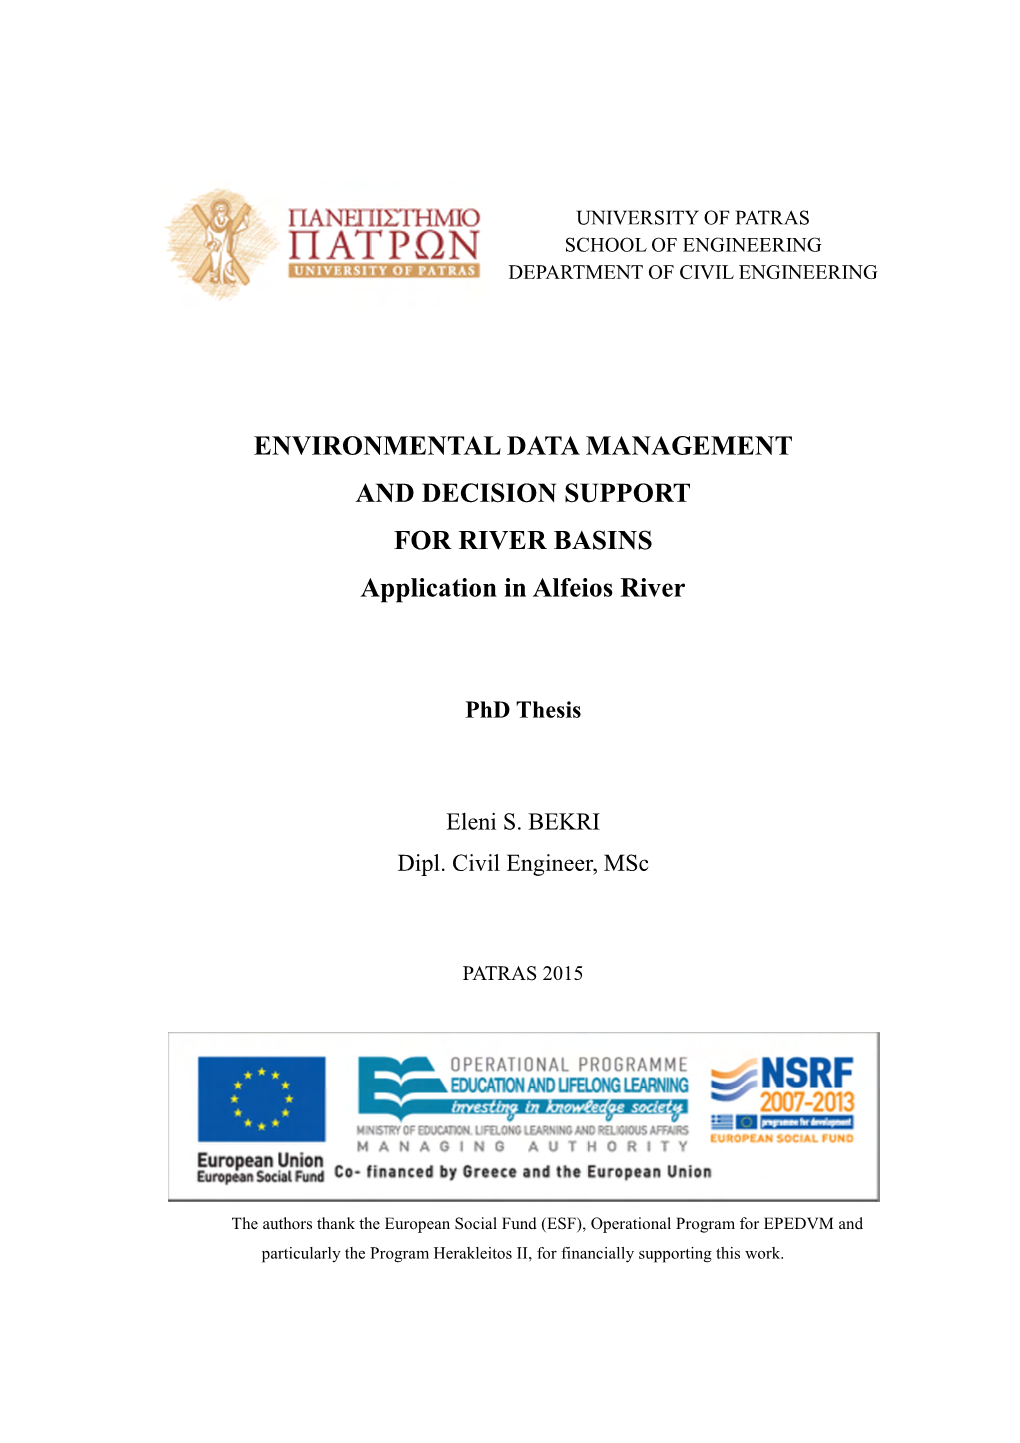 ENVIRONMENTAL DATA MANAGEMENT and DECISION SUPPORT for RIVER BASINS Application in Alfeios River